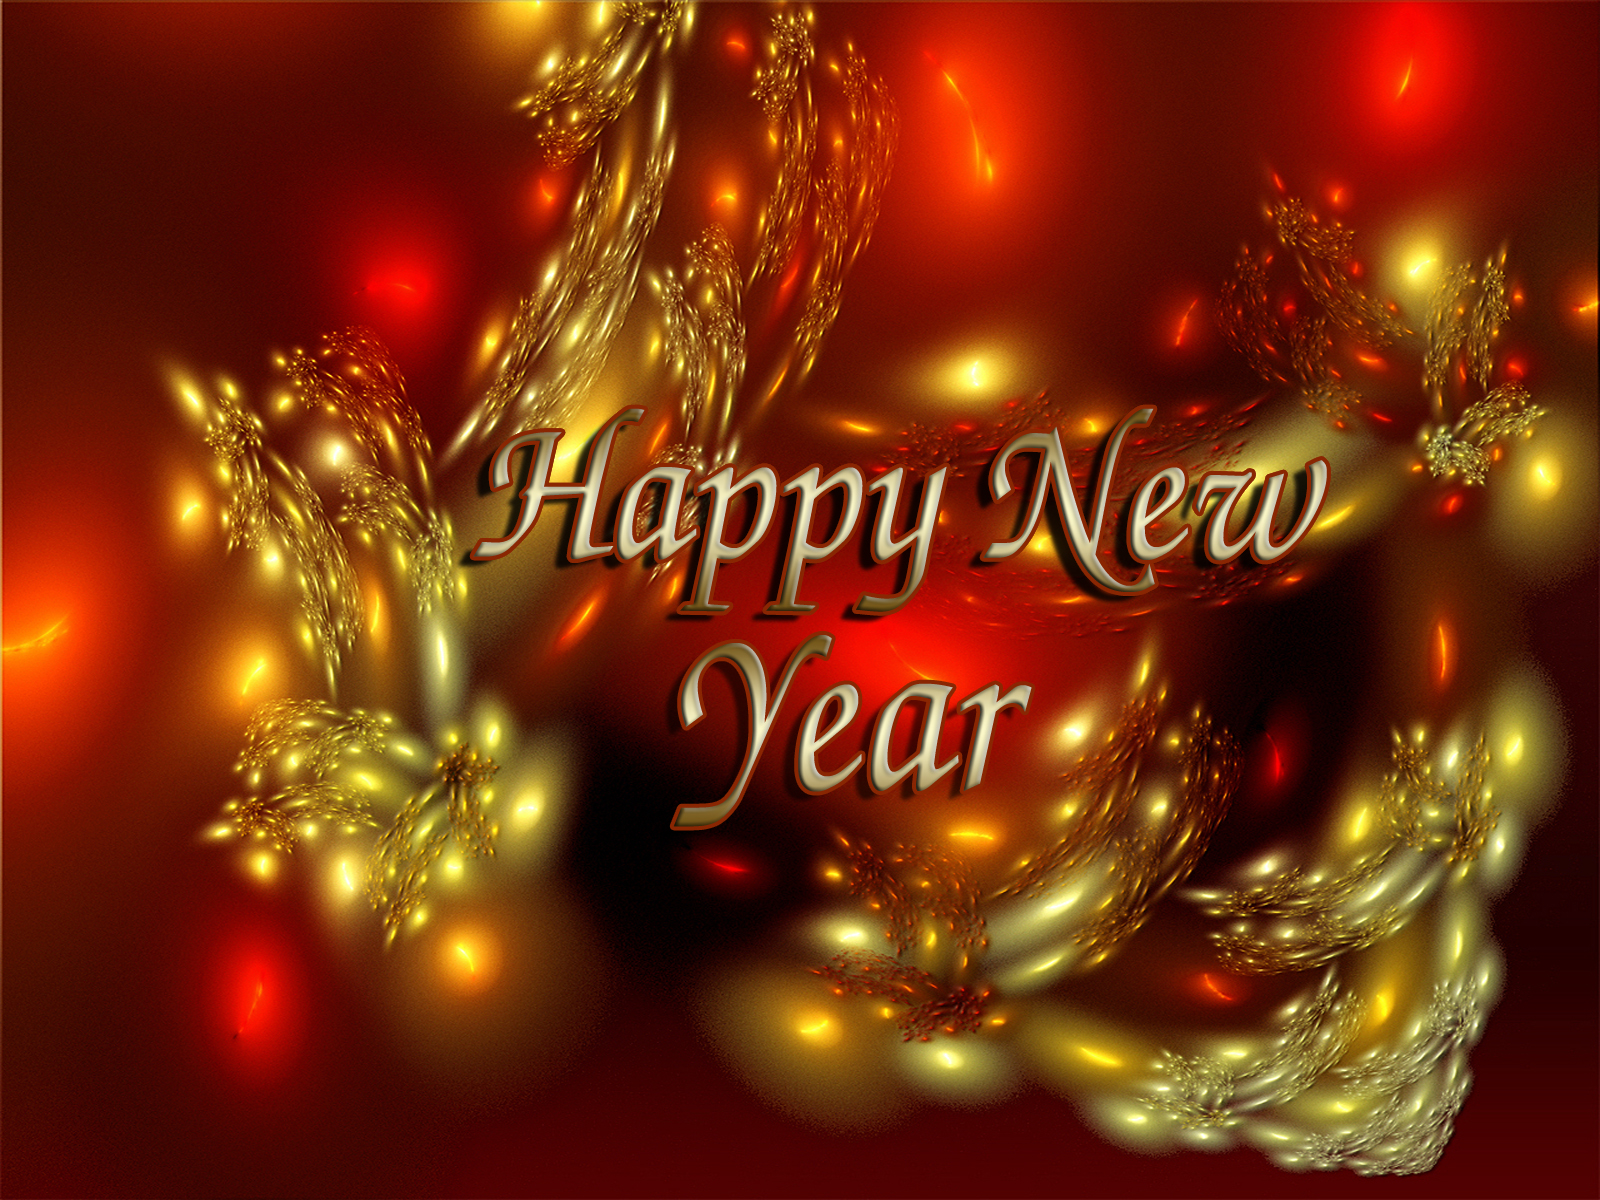 Happy new year wallpapers is a great thing to in new year wallpapers